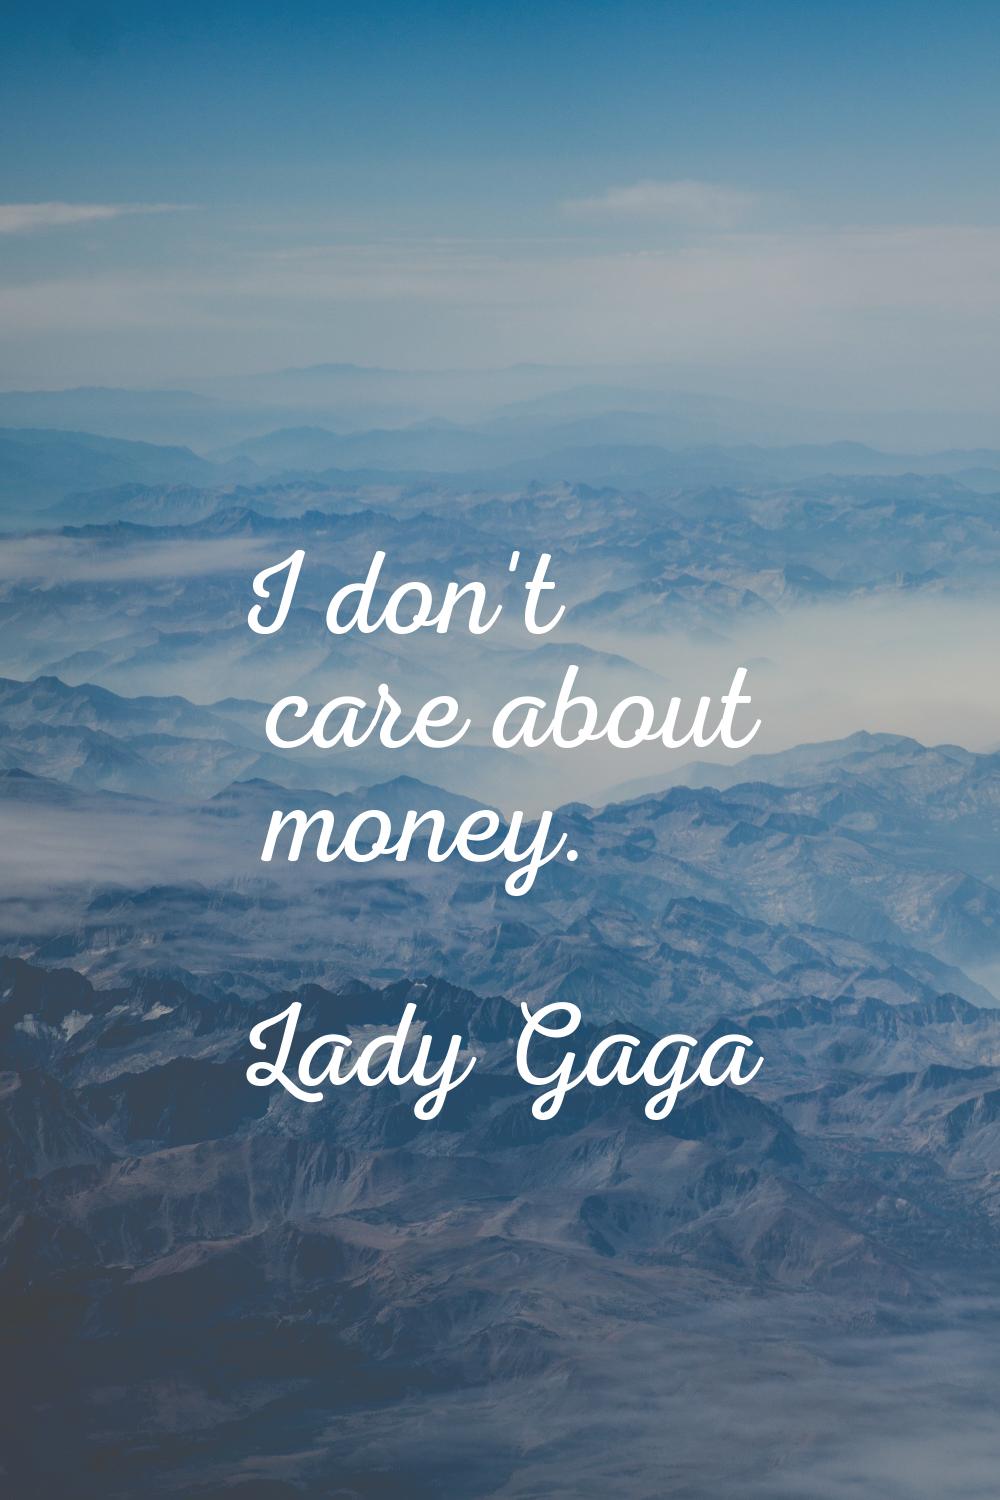 I don't care about money.